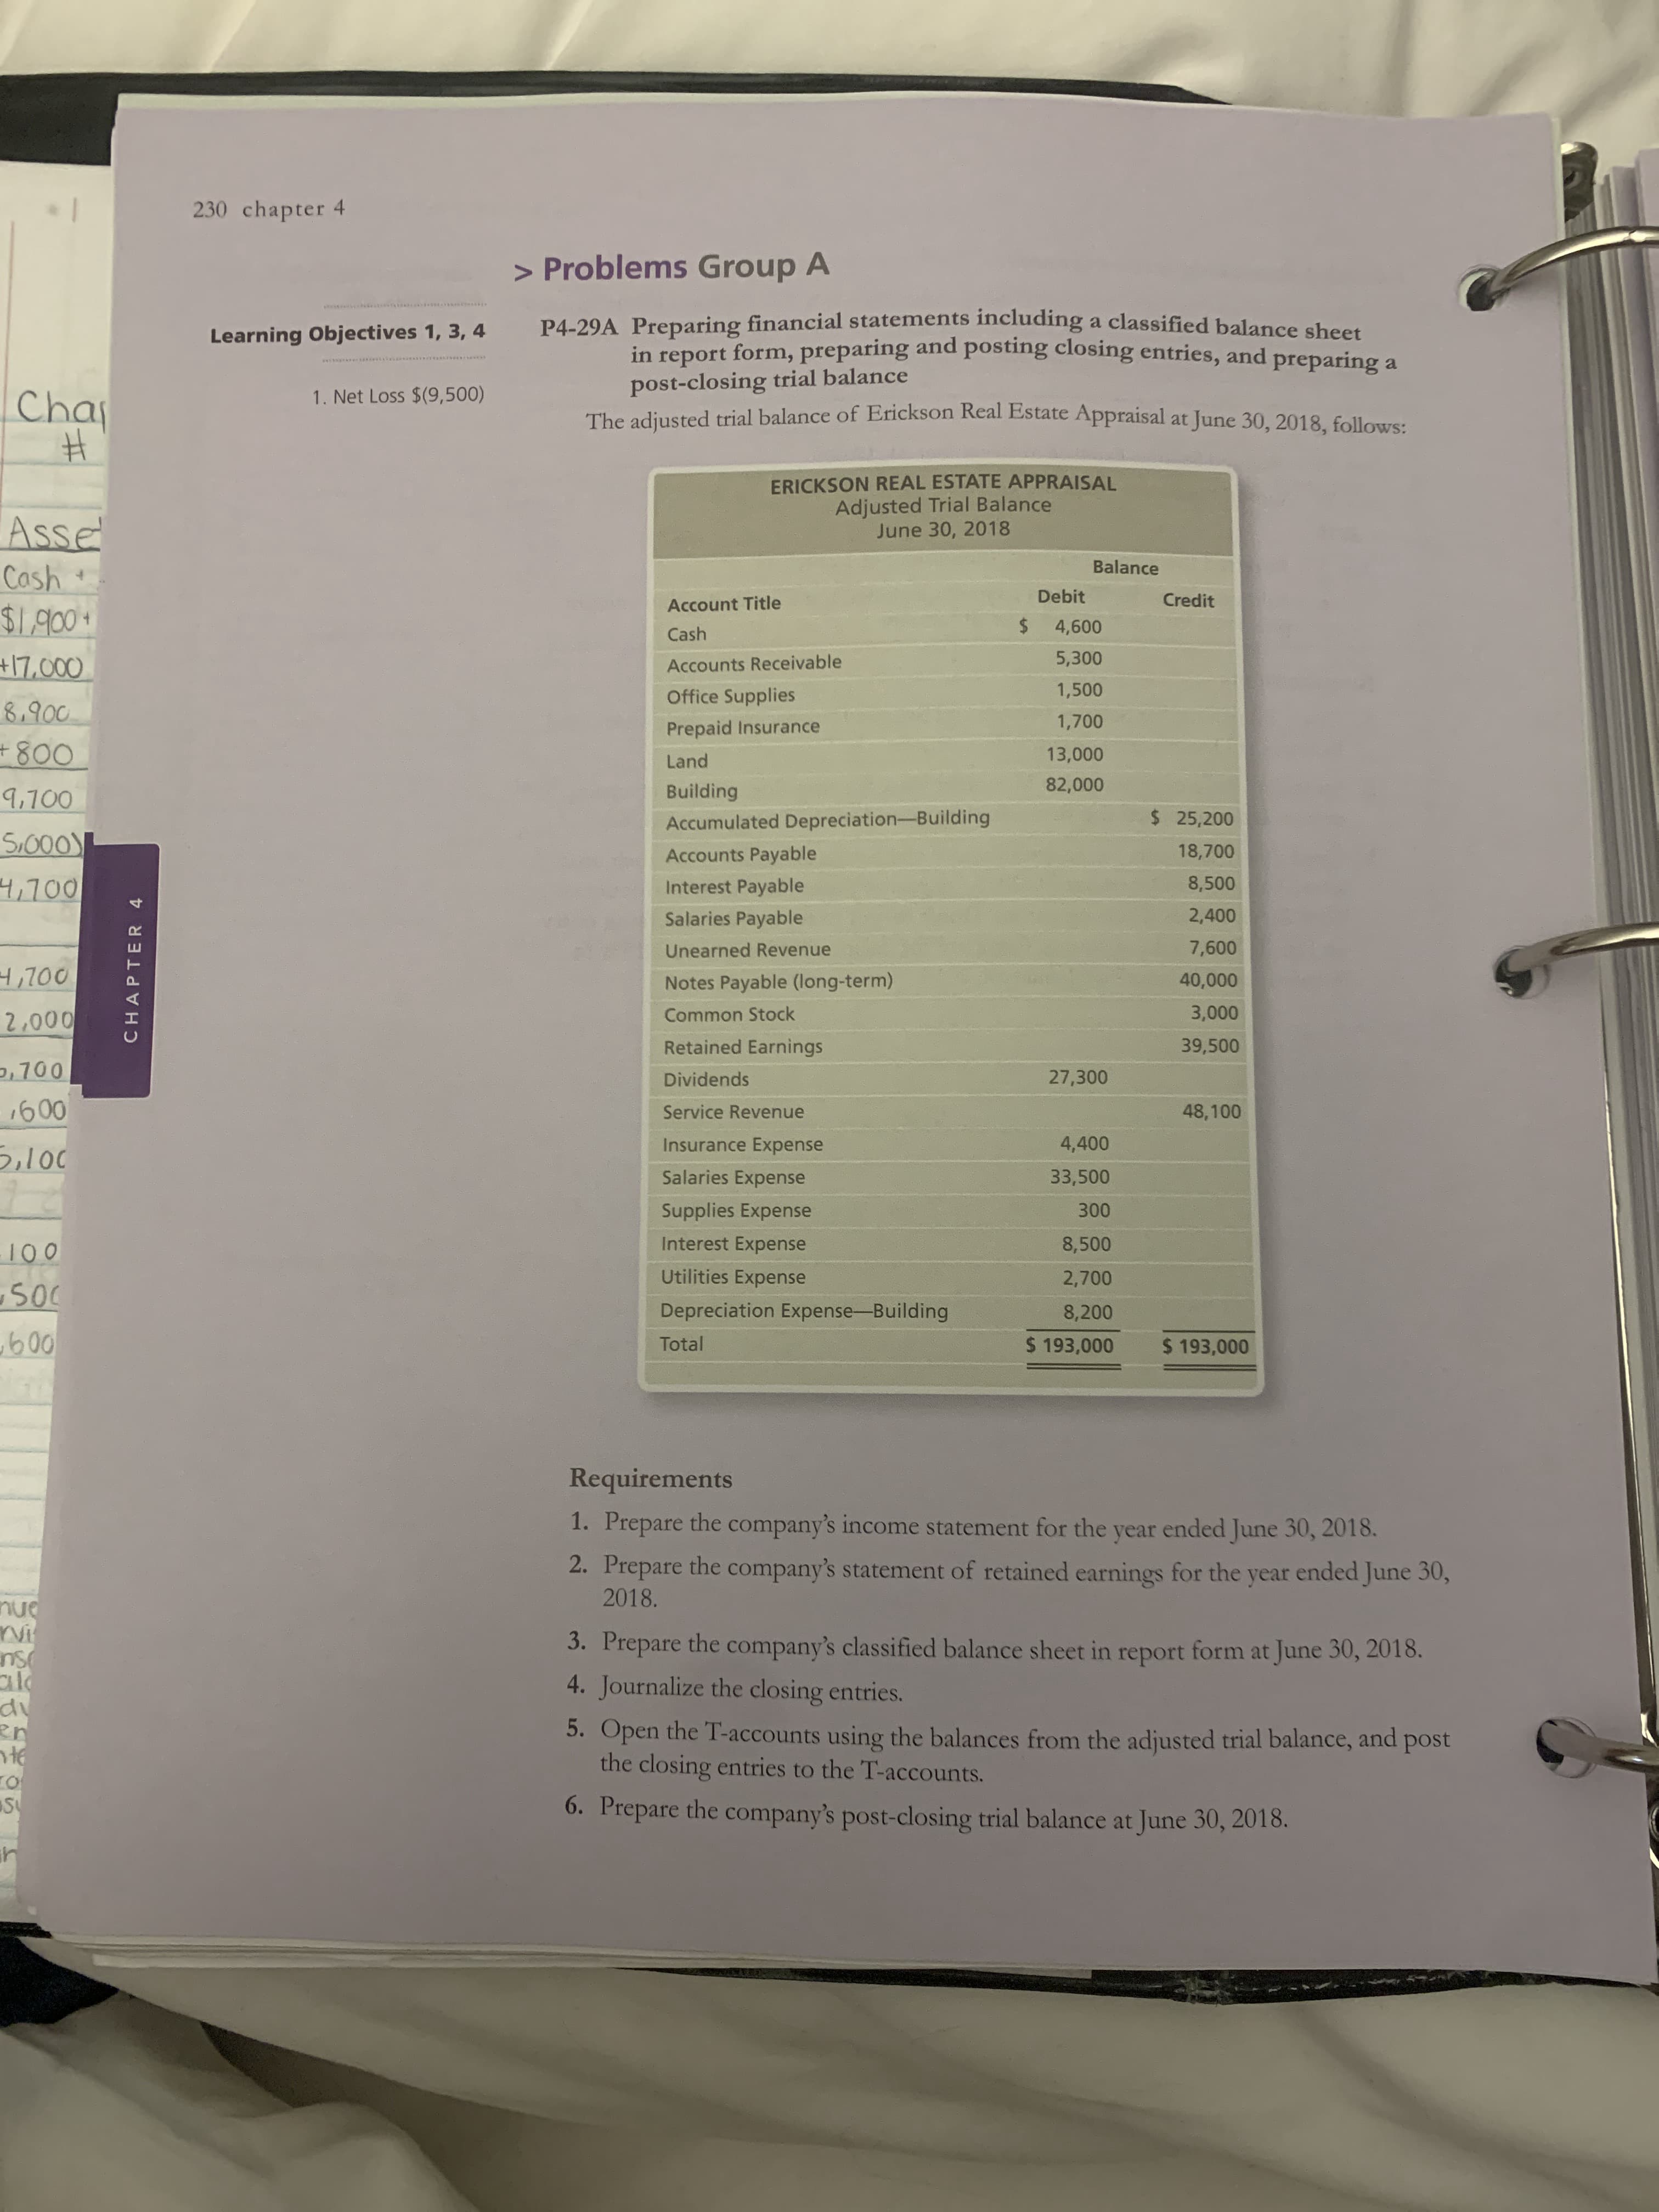 P4-29A Preparing financial statements including a classified balance sheet
in report form, preparing and posting closing entries, and preparing a
post-closing trial balance
The adiusted trial balance of Erickson Real Estate Appraisal at June 30, 2018 follows:
ERICKSON REAL ESTATE APPRAISAL
Adjusted Trial Balance
June 30, 2018
Balance
Debit
Credit
Account Title
%24
4,600
Cash
5,300
Accounts Receivable
Office Supplies
1,500
1,700
Prepaid Insurance
Land
13,000
82,000
Building
Accumulated Depreciation-Building
$ 25,200
Accounts Payable
18,700
Interest Payable
8,500
Salaries Payable
2,400
Unearned Revenue
7,600
Notes Payable (long-term)
40,000
Common Stock
3,000
Retained Earnings
39,500
Dividends
27,300
Service Revenue
48,100
Insurance Expense
4,400
Salaries Expense
33,500
Supplies Expense
300
Interest Expense
8,500
Utilities Expense
2,700
Depreciation Expense-Building
8,200
Total
$ 193,000
$ 193,000
Requirements
1. Prepare the company's income statement for the year ended June 30, 2018.
2. Prepare the company's statement of retained earnings for the year ended June 30,
2018.
3. Prepare the company's classified balance sheet in report form at June 30, 2018.
4. Journalize the
